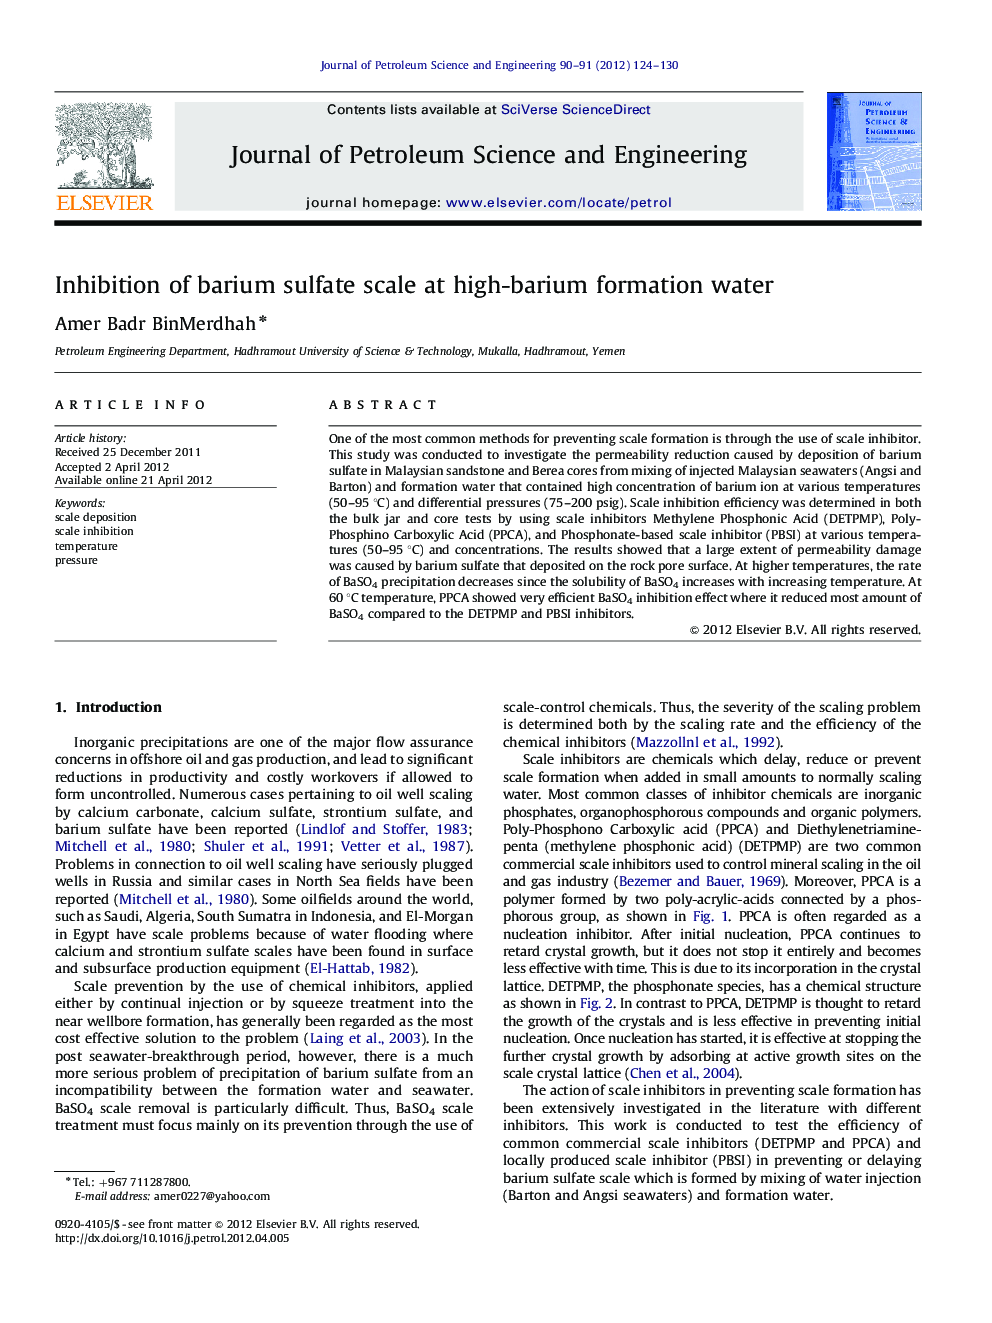 Inhibition of barium sulfate scale at high-barium formation water